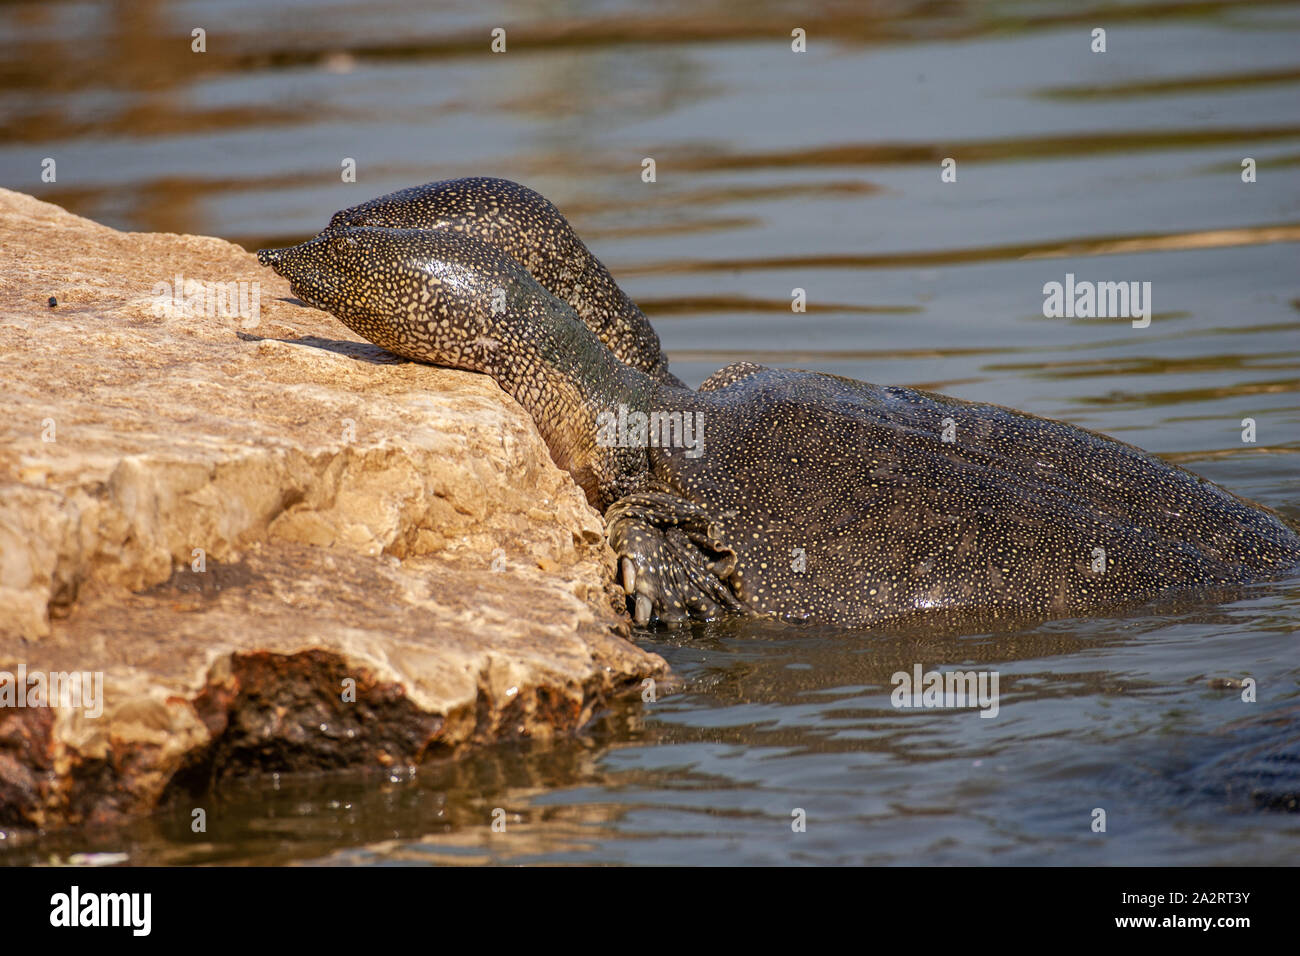 African softshell turtle (Trionyx triunguis) צב רך מצוי Foto Stock